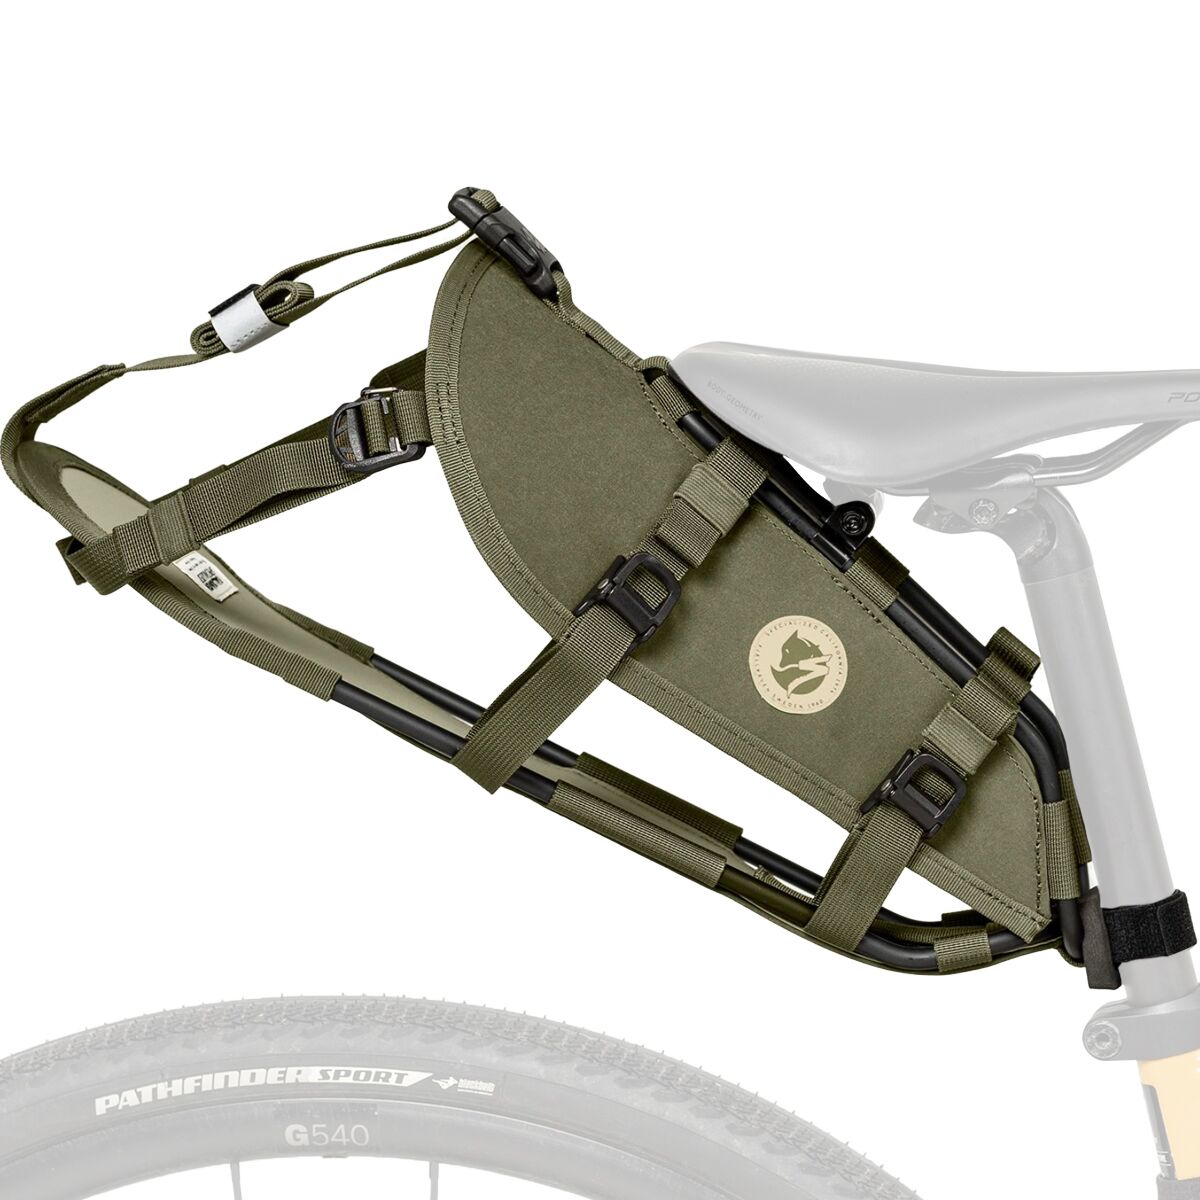 Specialized S/F Seatbag Harness